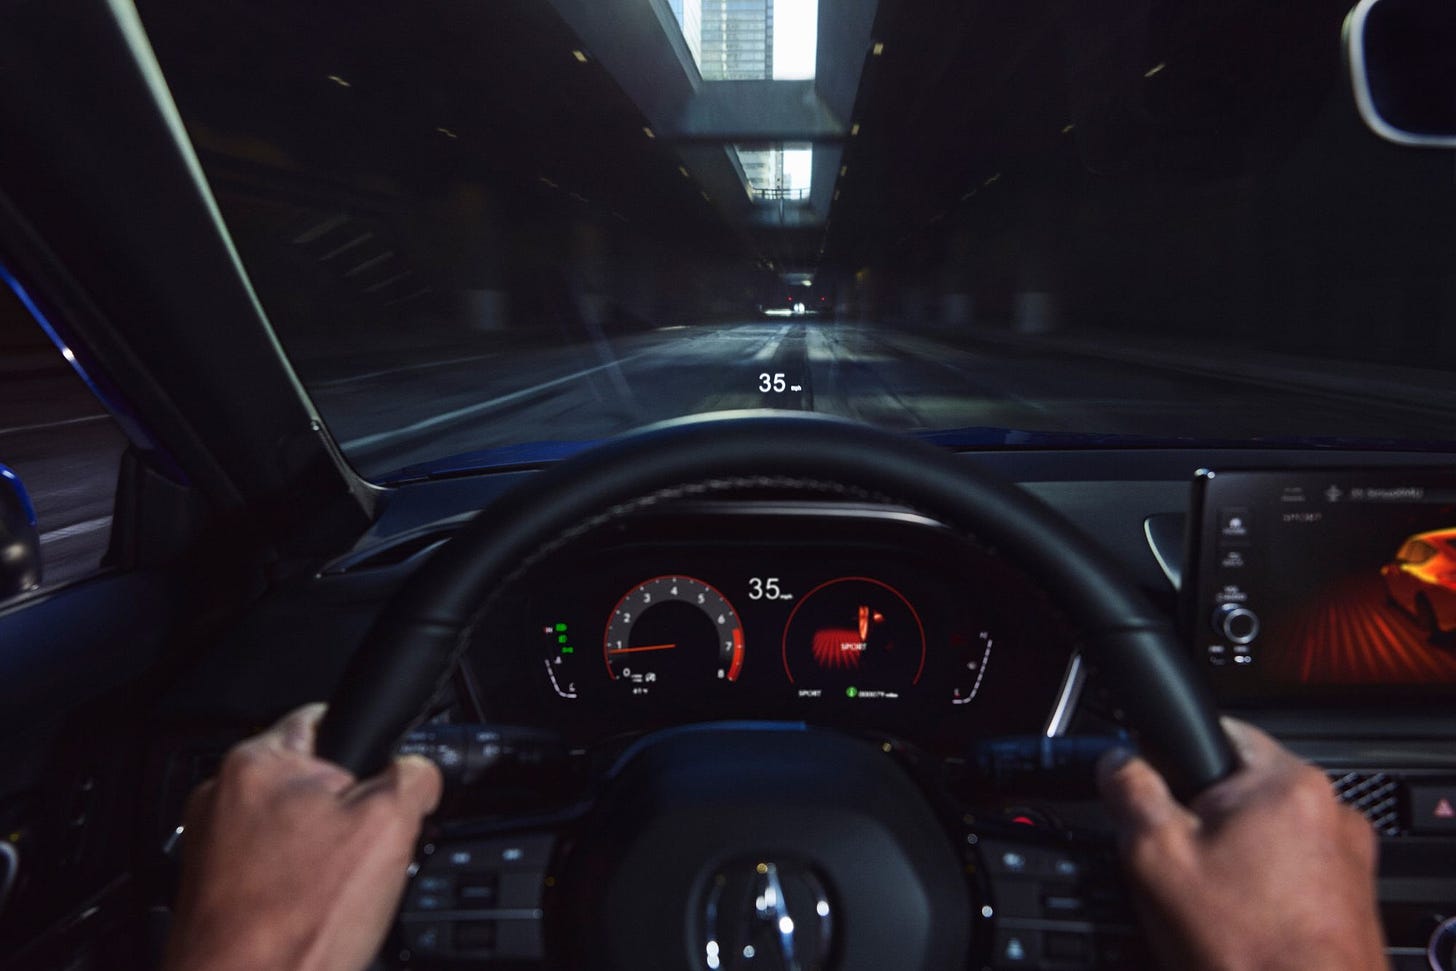 driver's eye view from acura integra interior, motion blur and 35mph indicated speed on HUD